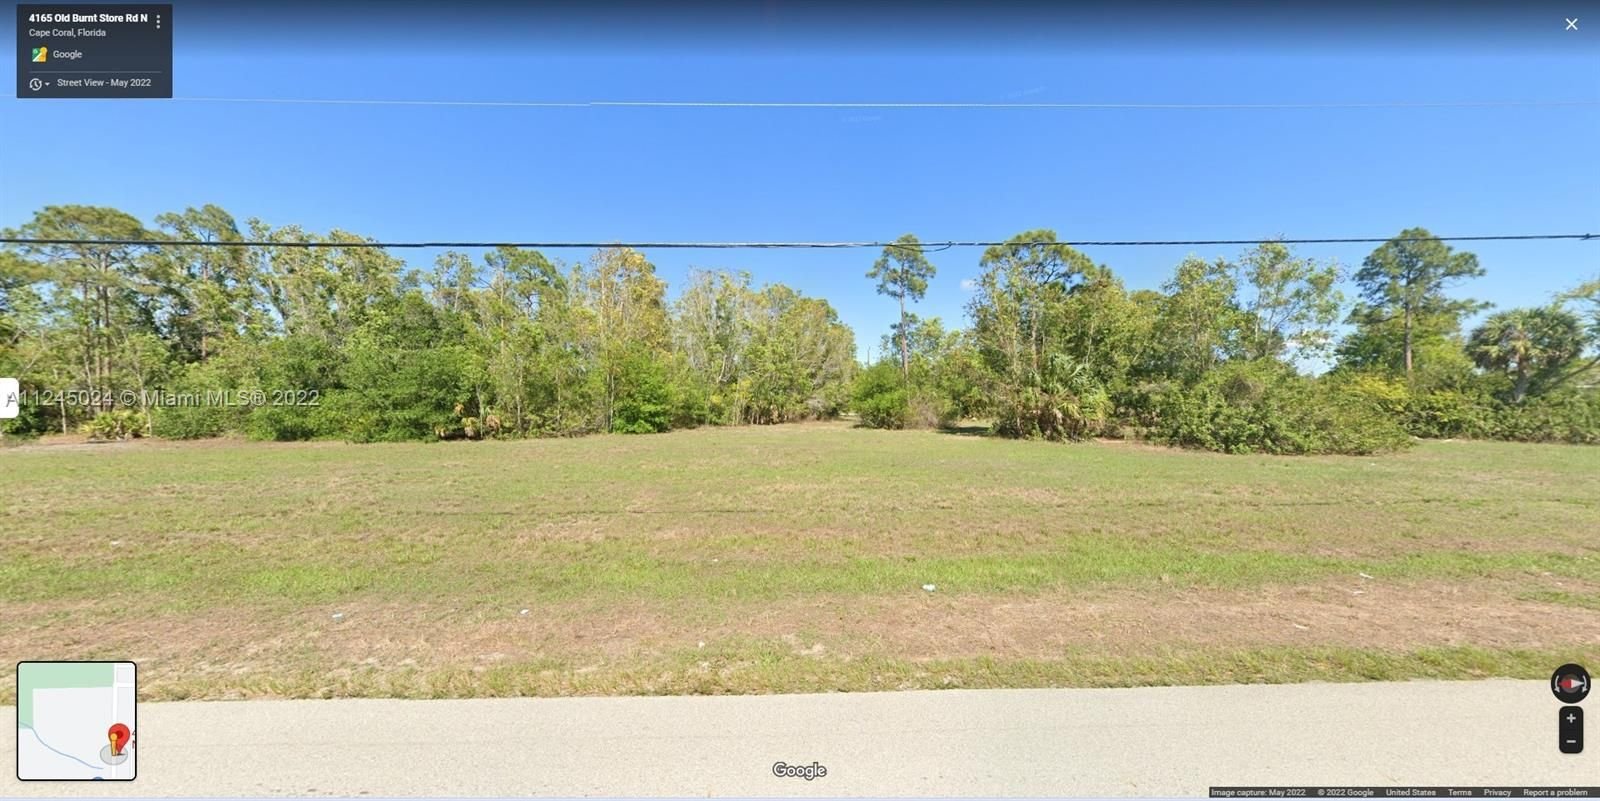 Real estate property located at 4165 Old Burnt Store Rd N, Lee County, Cape Coral, FL